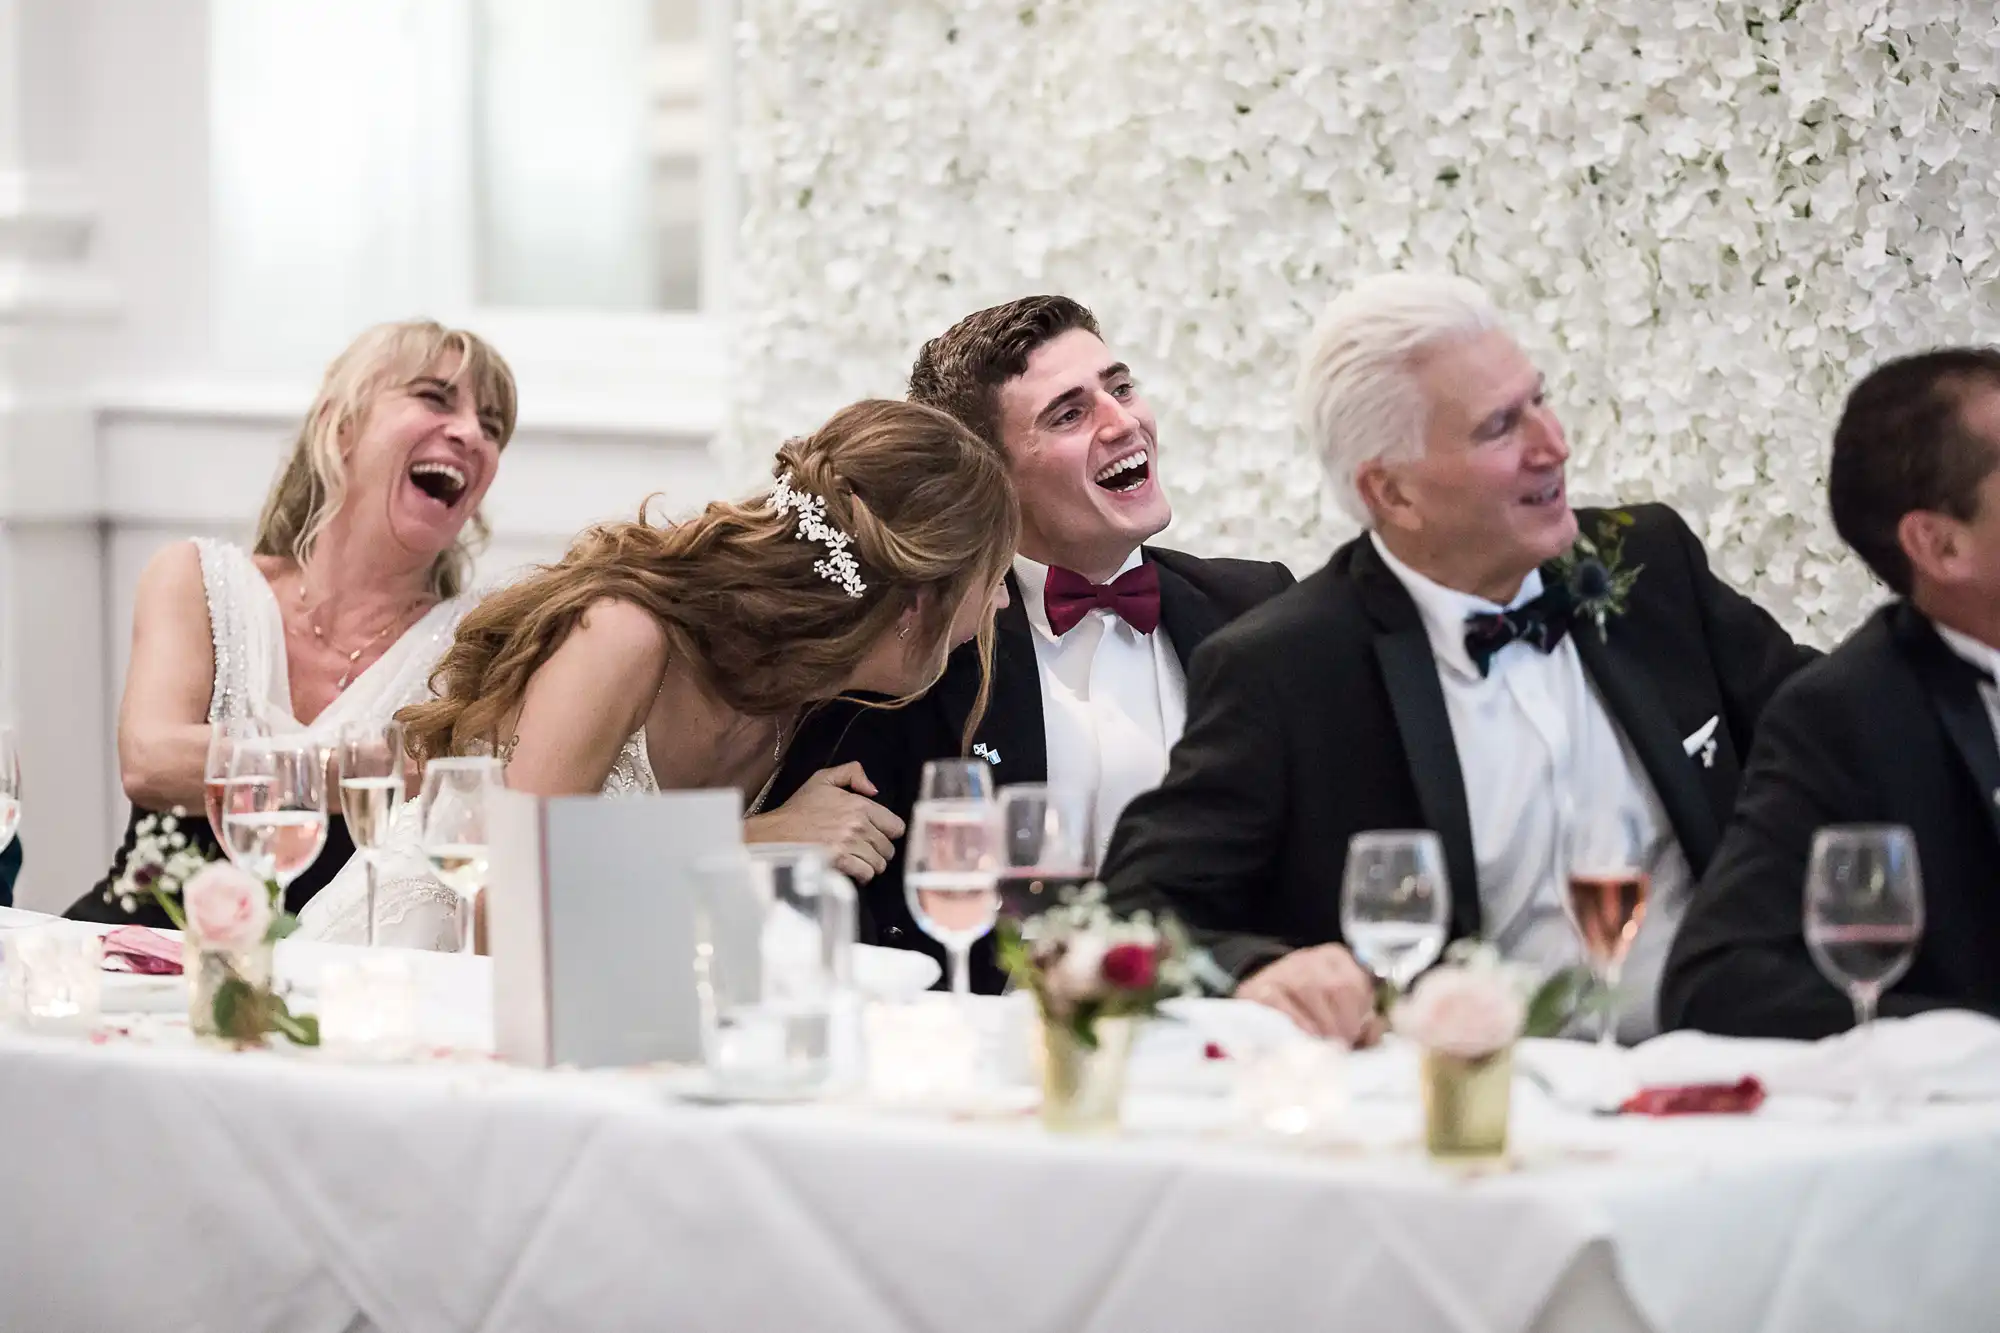 A group of people dressed in formal attire are seated at a table, laughing and looking towards the left. The background features a white floral wall.